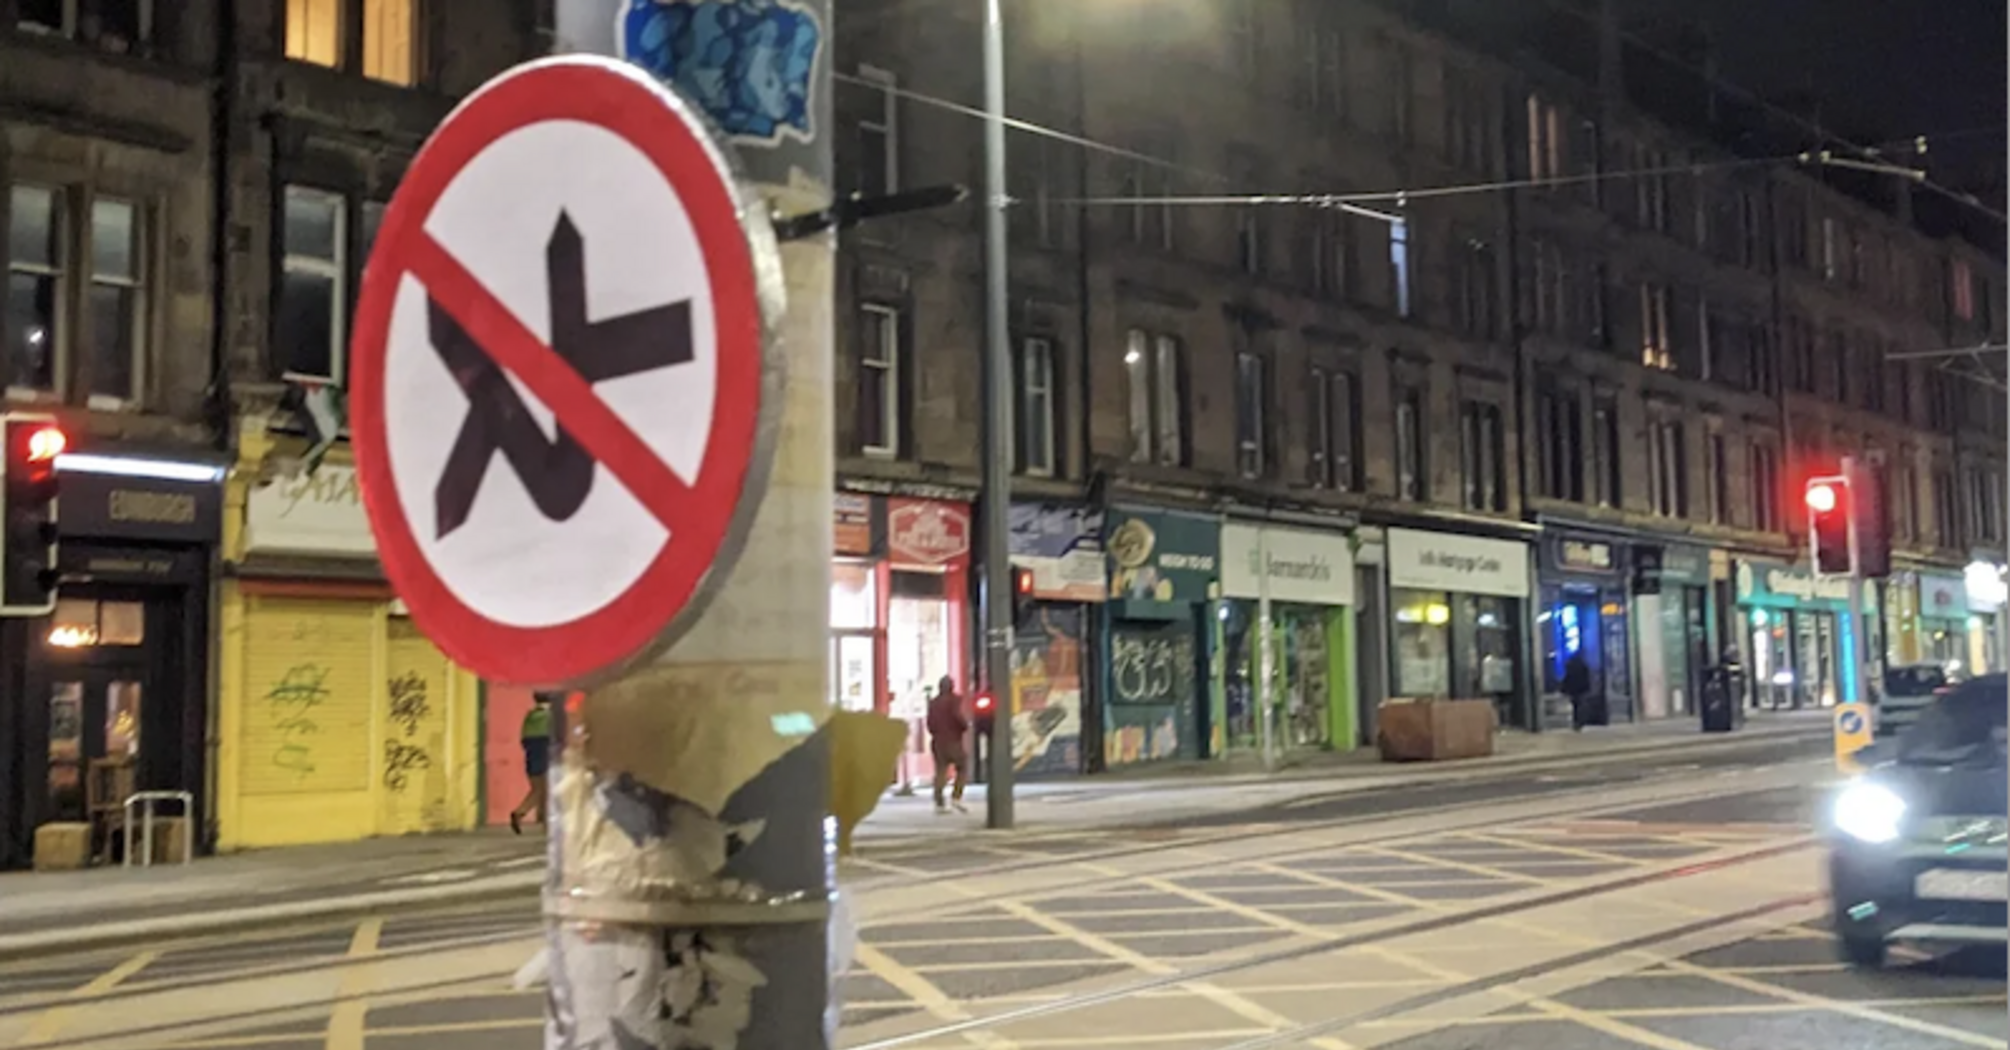 New "signs" have appeared on the roads of Edinburgh: tourists and inexperienced drivers may get confused